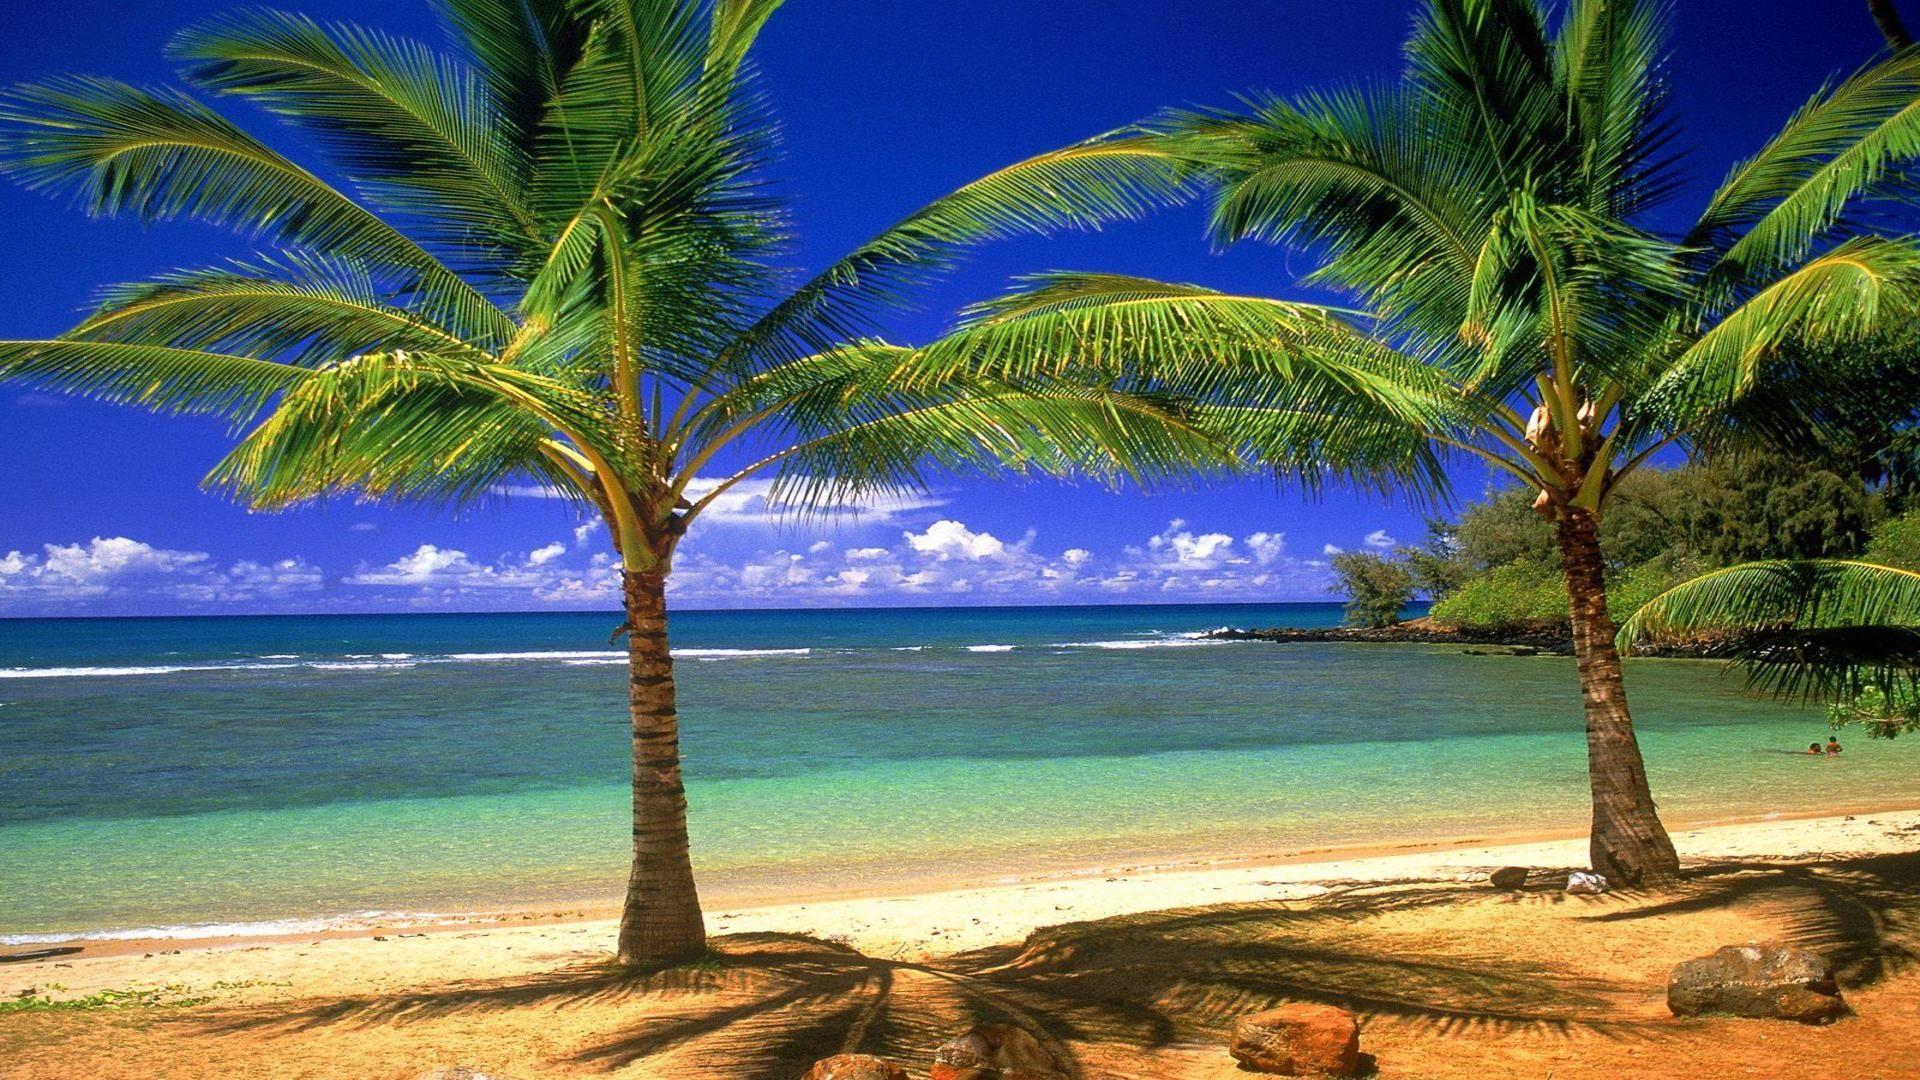 Beach Palm Tree Wallpaper Hd Picture Image